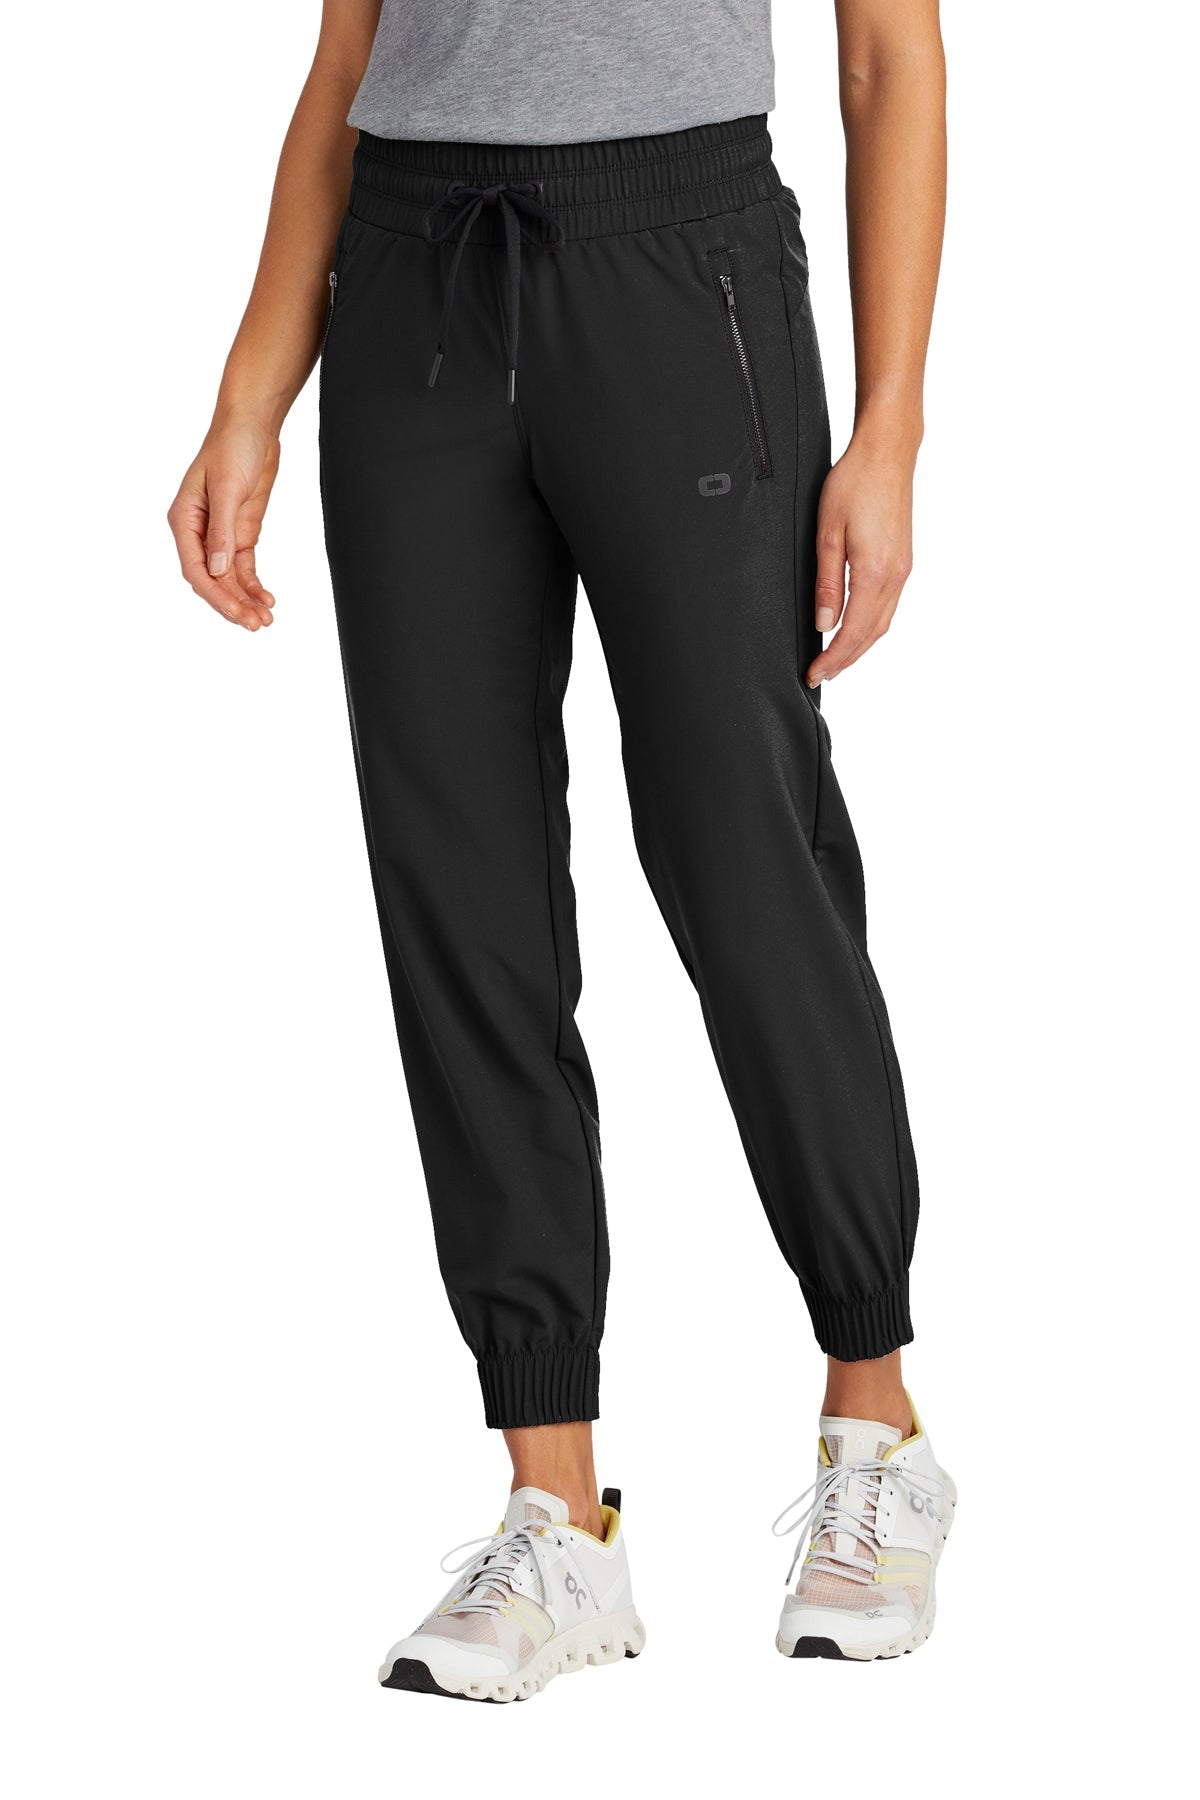 OGIO Ladies Connection Customized Joggers, Blacktop